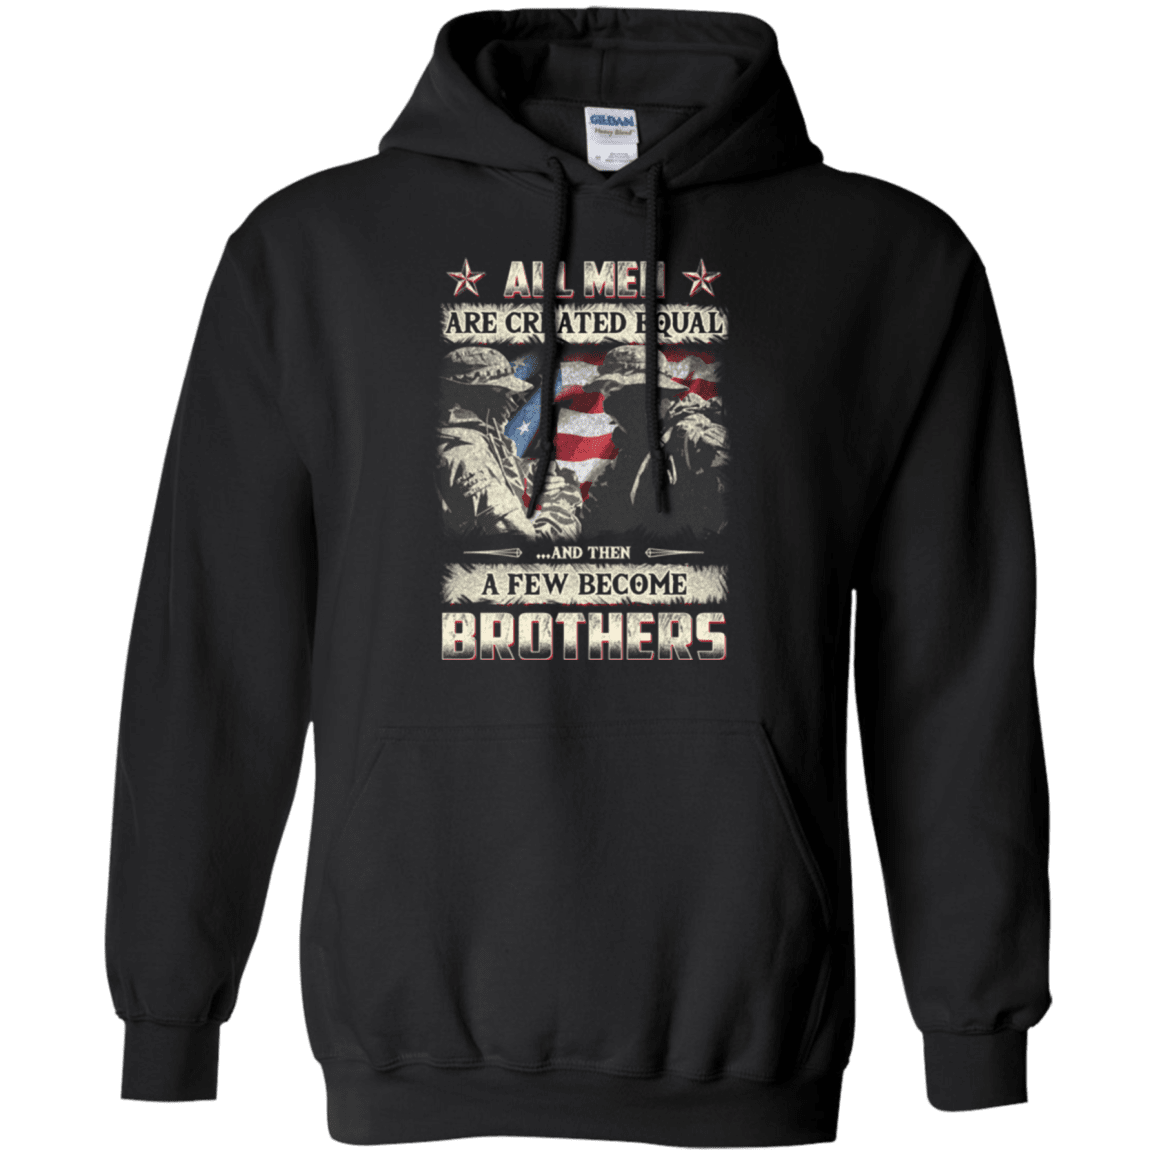 Military T-Shirt "All Men Create Qqual A Few Become Brothers"-TShirt-General-Veterans Nation